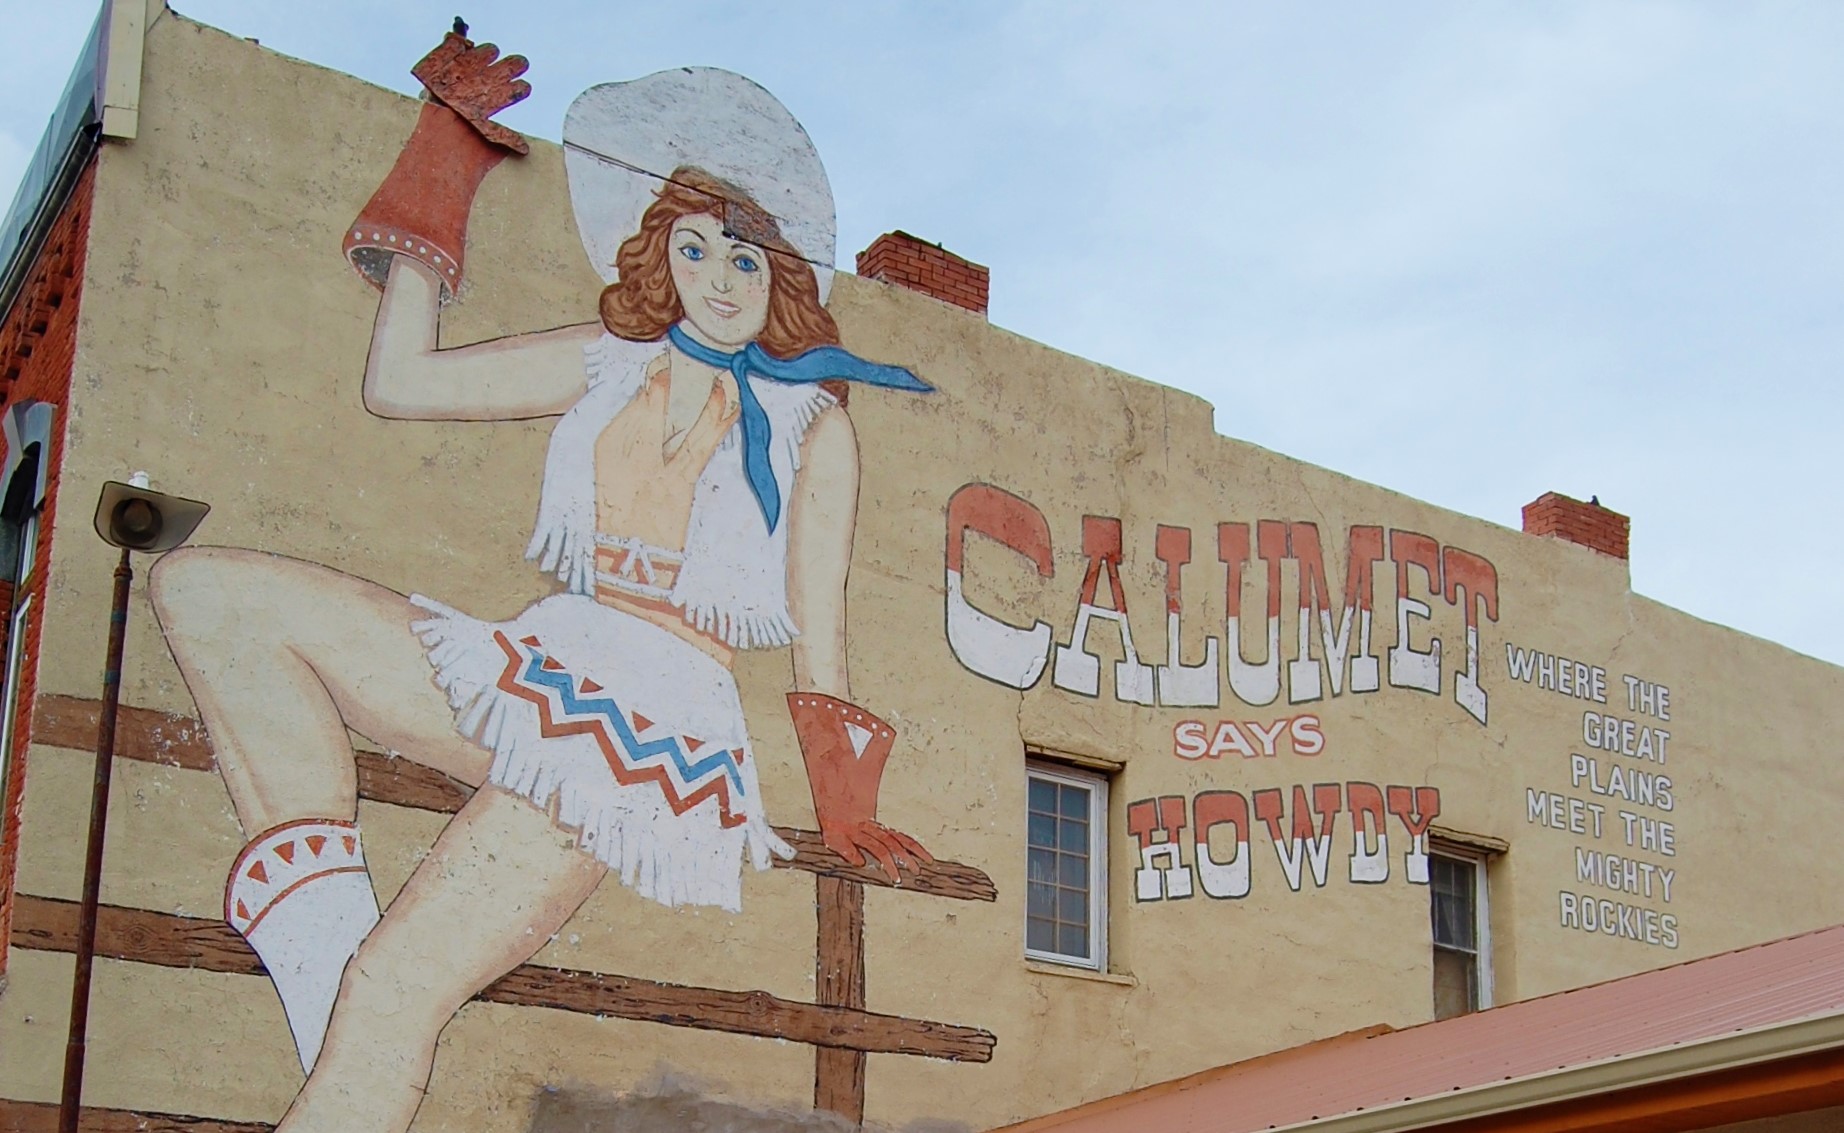 A painted mural of a woman in Western attire, on the side of a brick building.